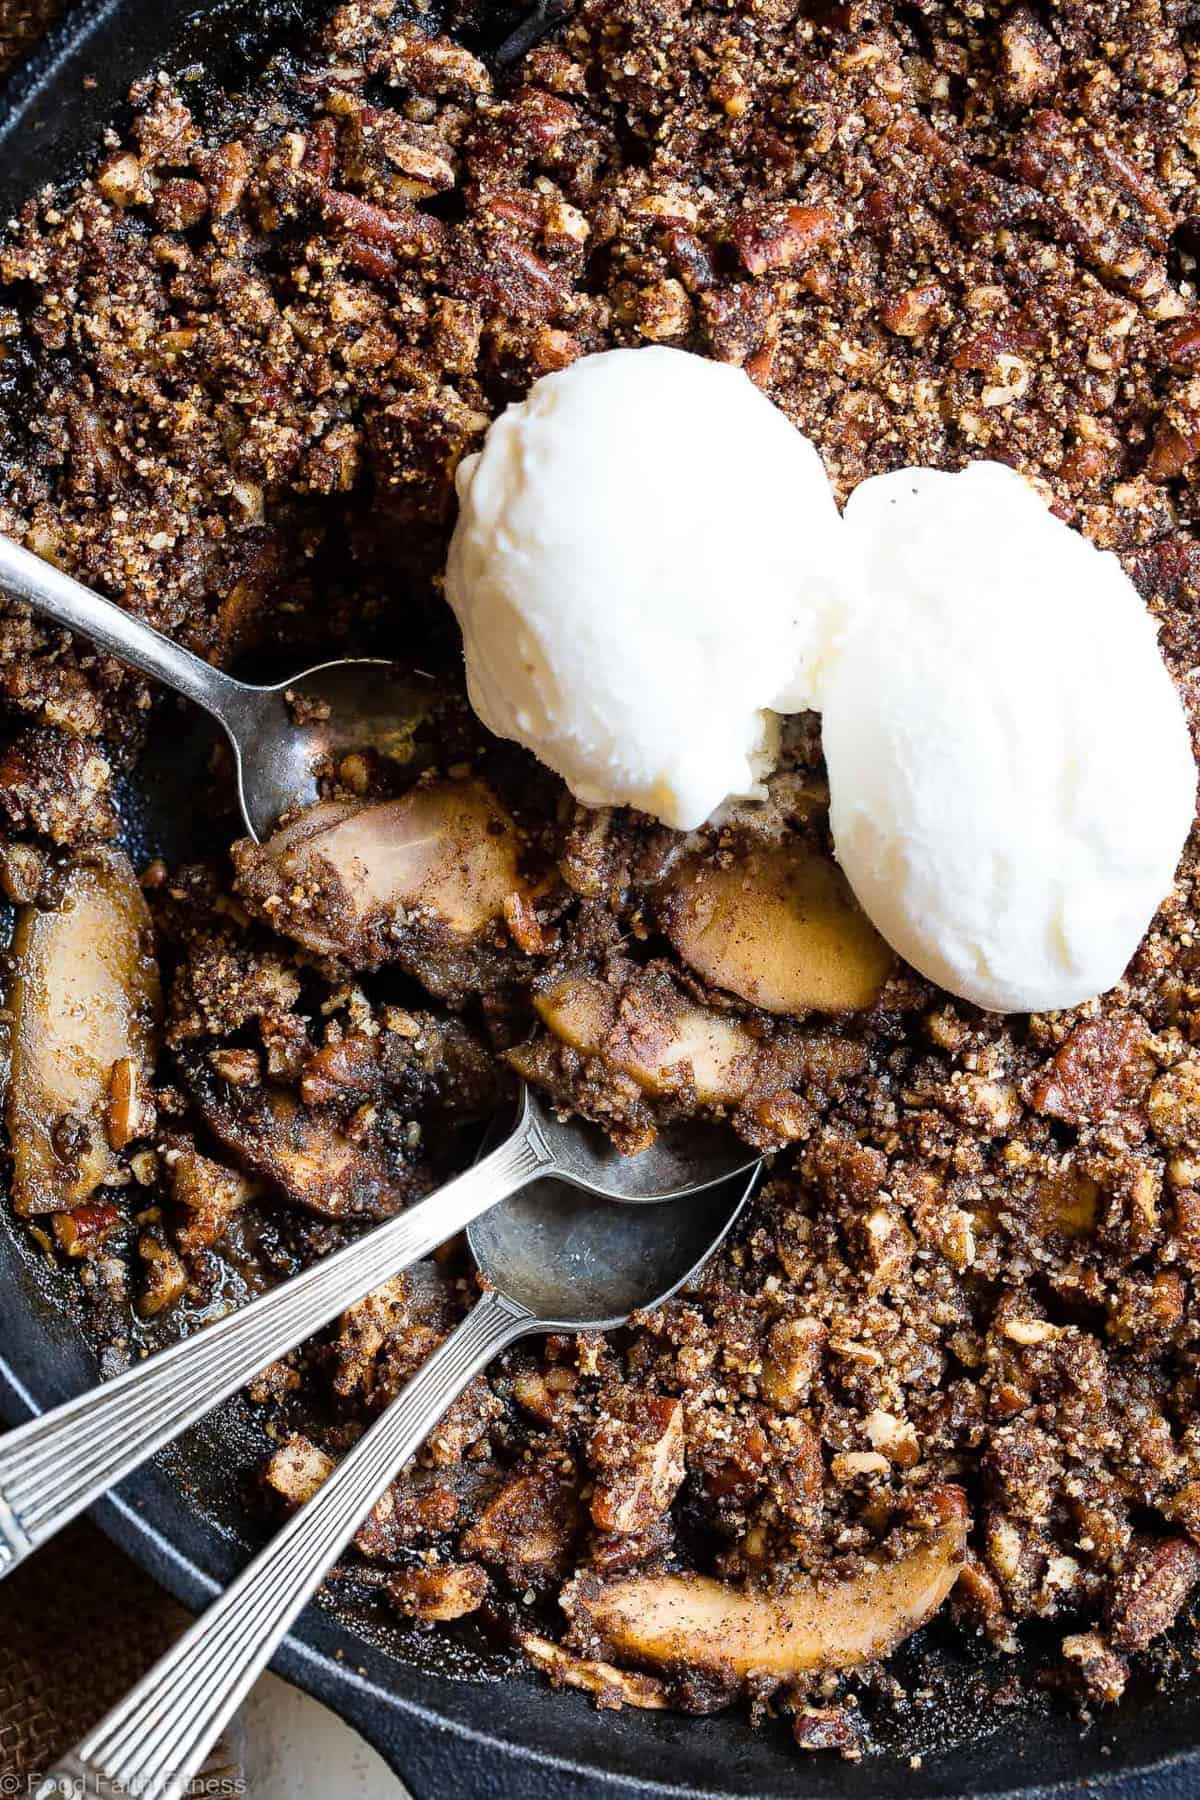 The BEST Paleo Vegan Apple Crisp with Coconut Flour - This gluten free apple crisp is an EASY, cozy fall dessert made with simple, wholesome ingredients! Perfectly crispy, and spicy-sweet that you won't believe it's gluten free, dairy free and better for you! | #Foodfaithfitness | #Vegan #Paleo #Healthy #Glutenfree #Dairyfree